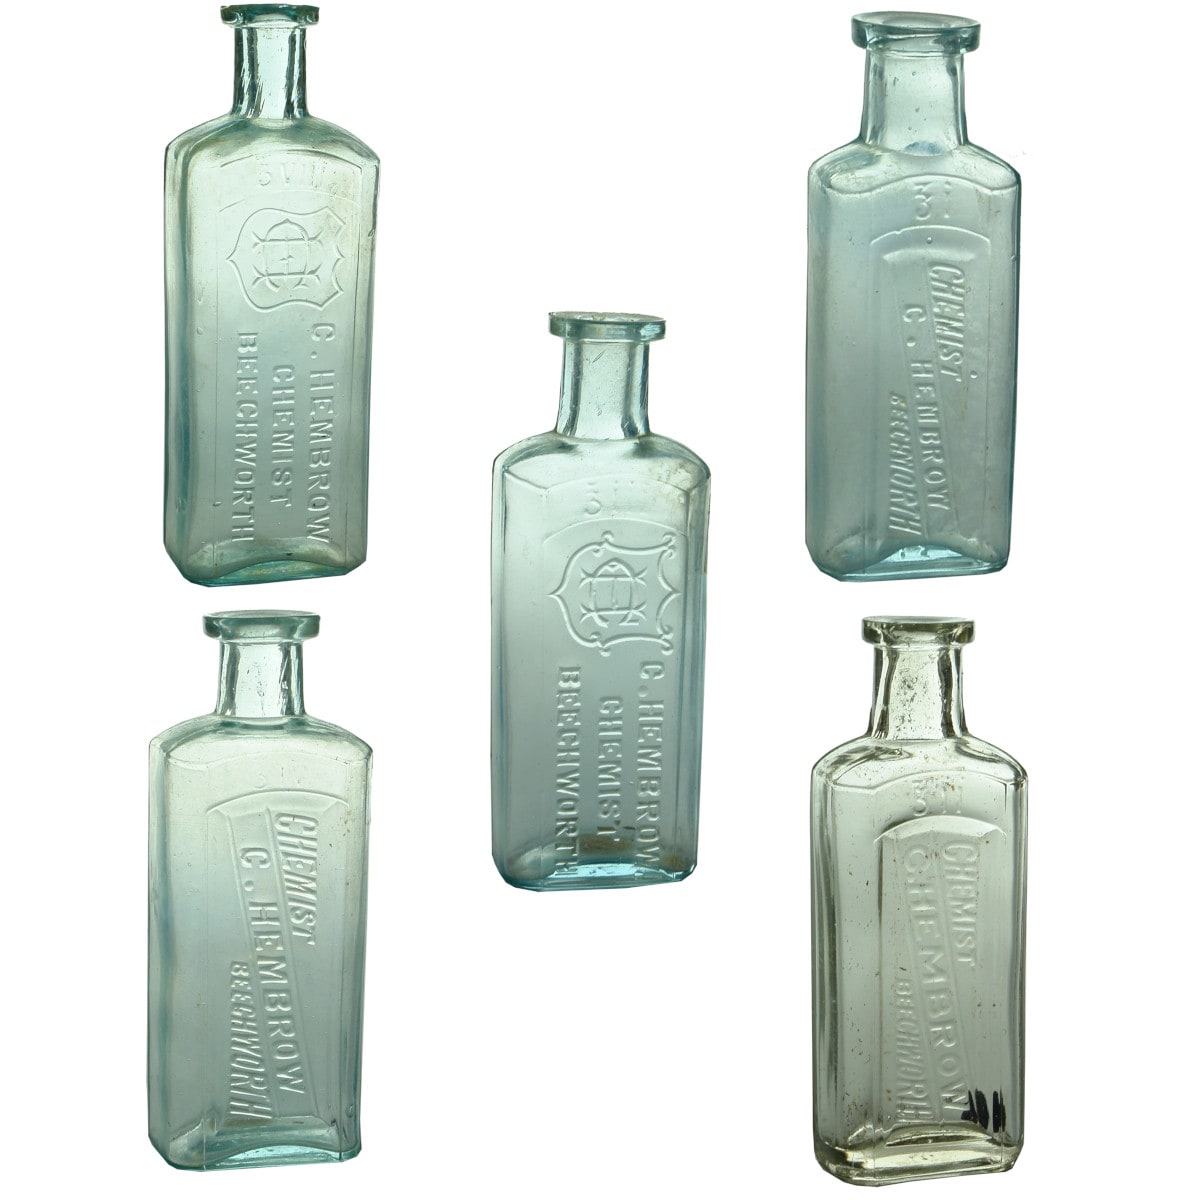 Five different Chemist bottles from C. Hembrow, Beechworth. (Victoria)